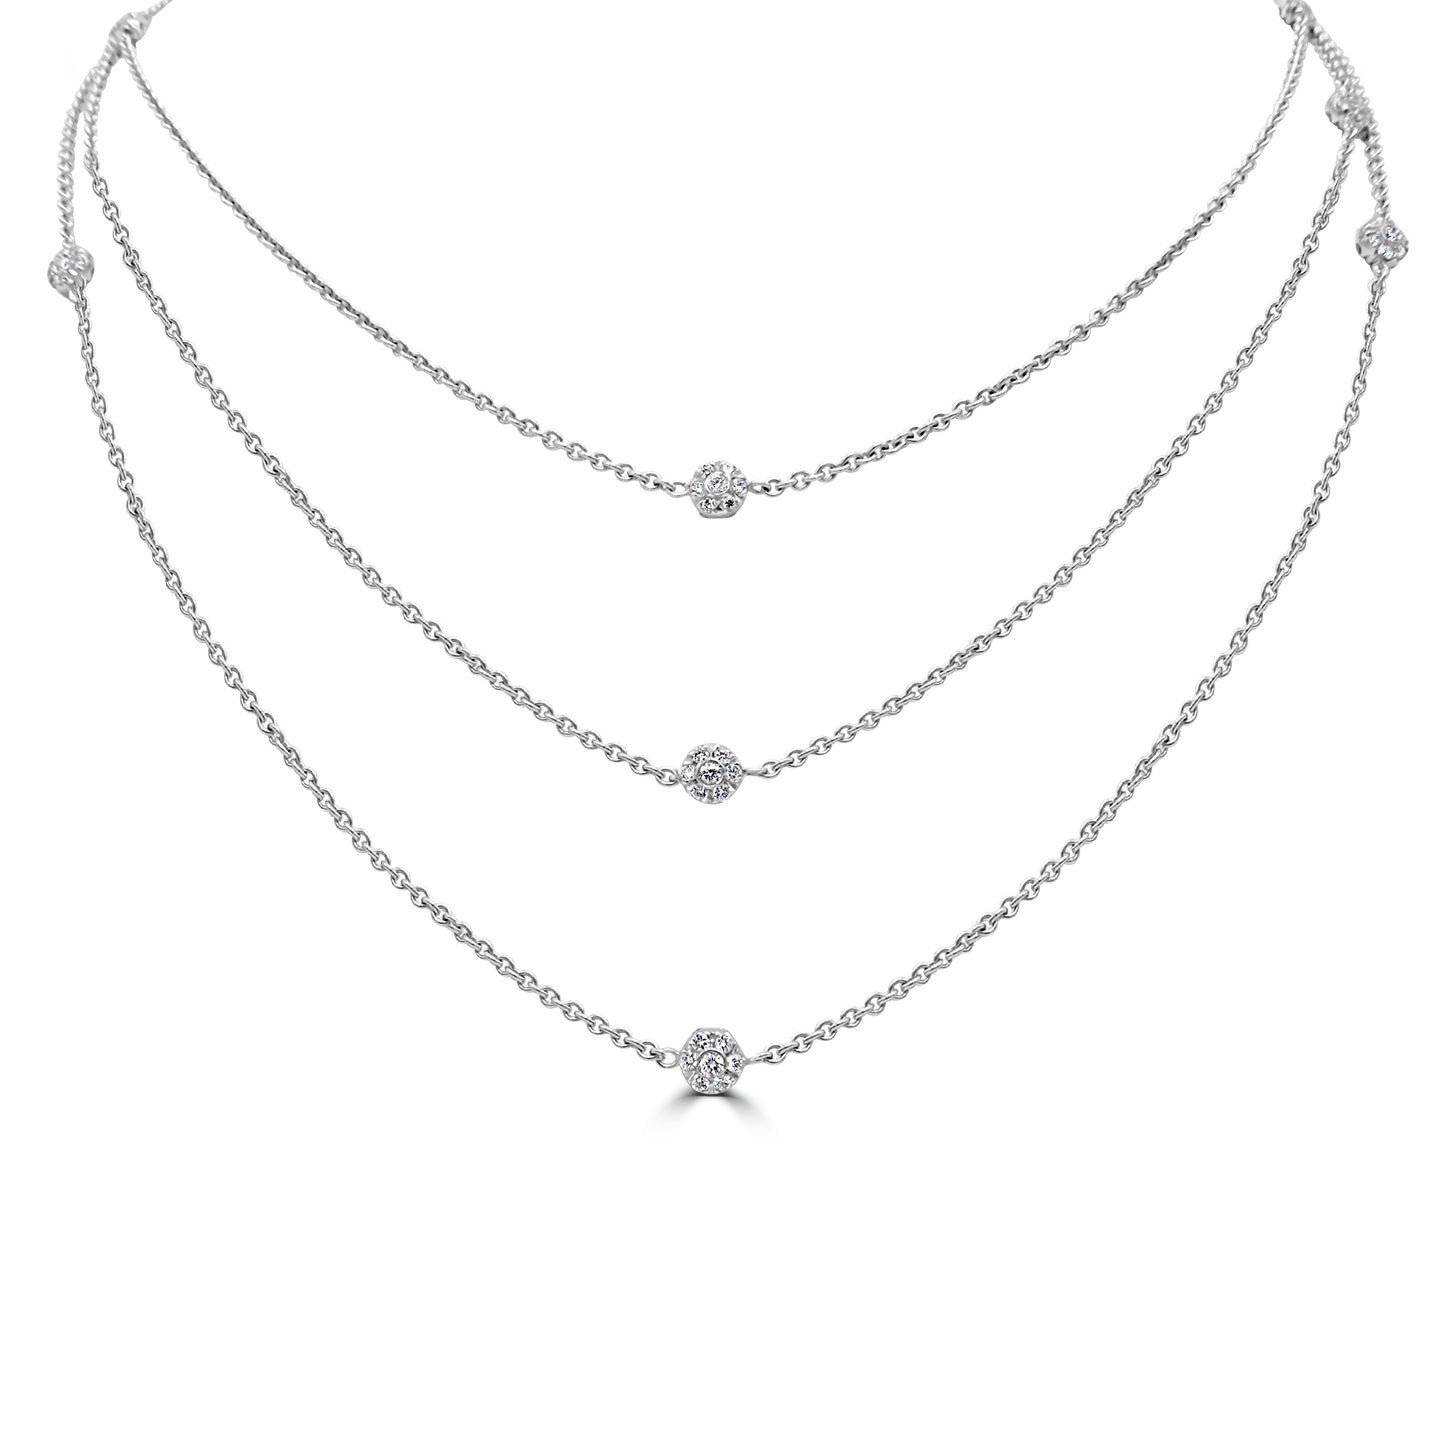 Long Triple Gold and Diamond Necklace